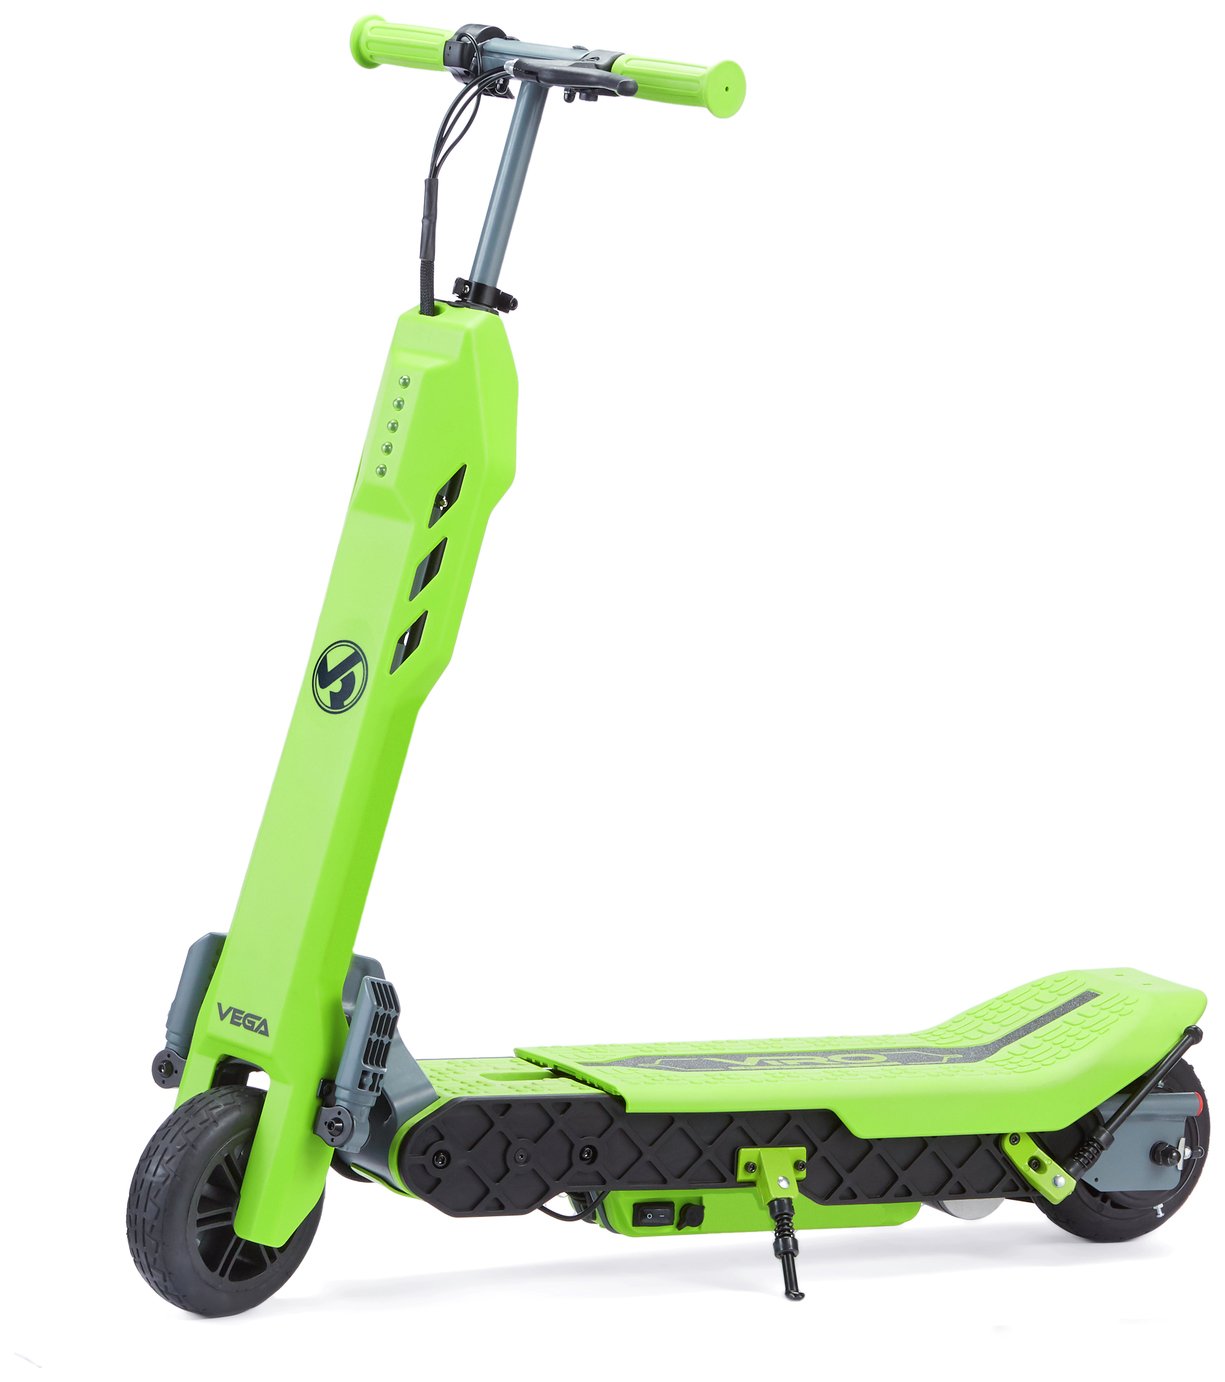 VIRO Vega 2 in 1 Transforming Electric Scooter Review